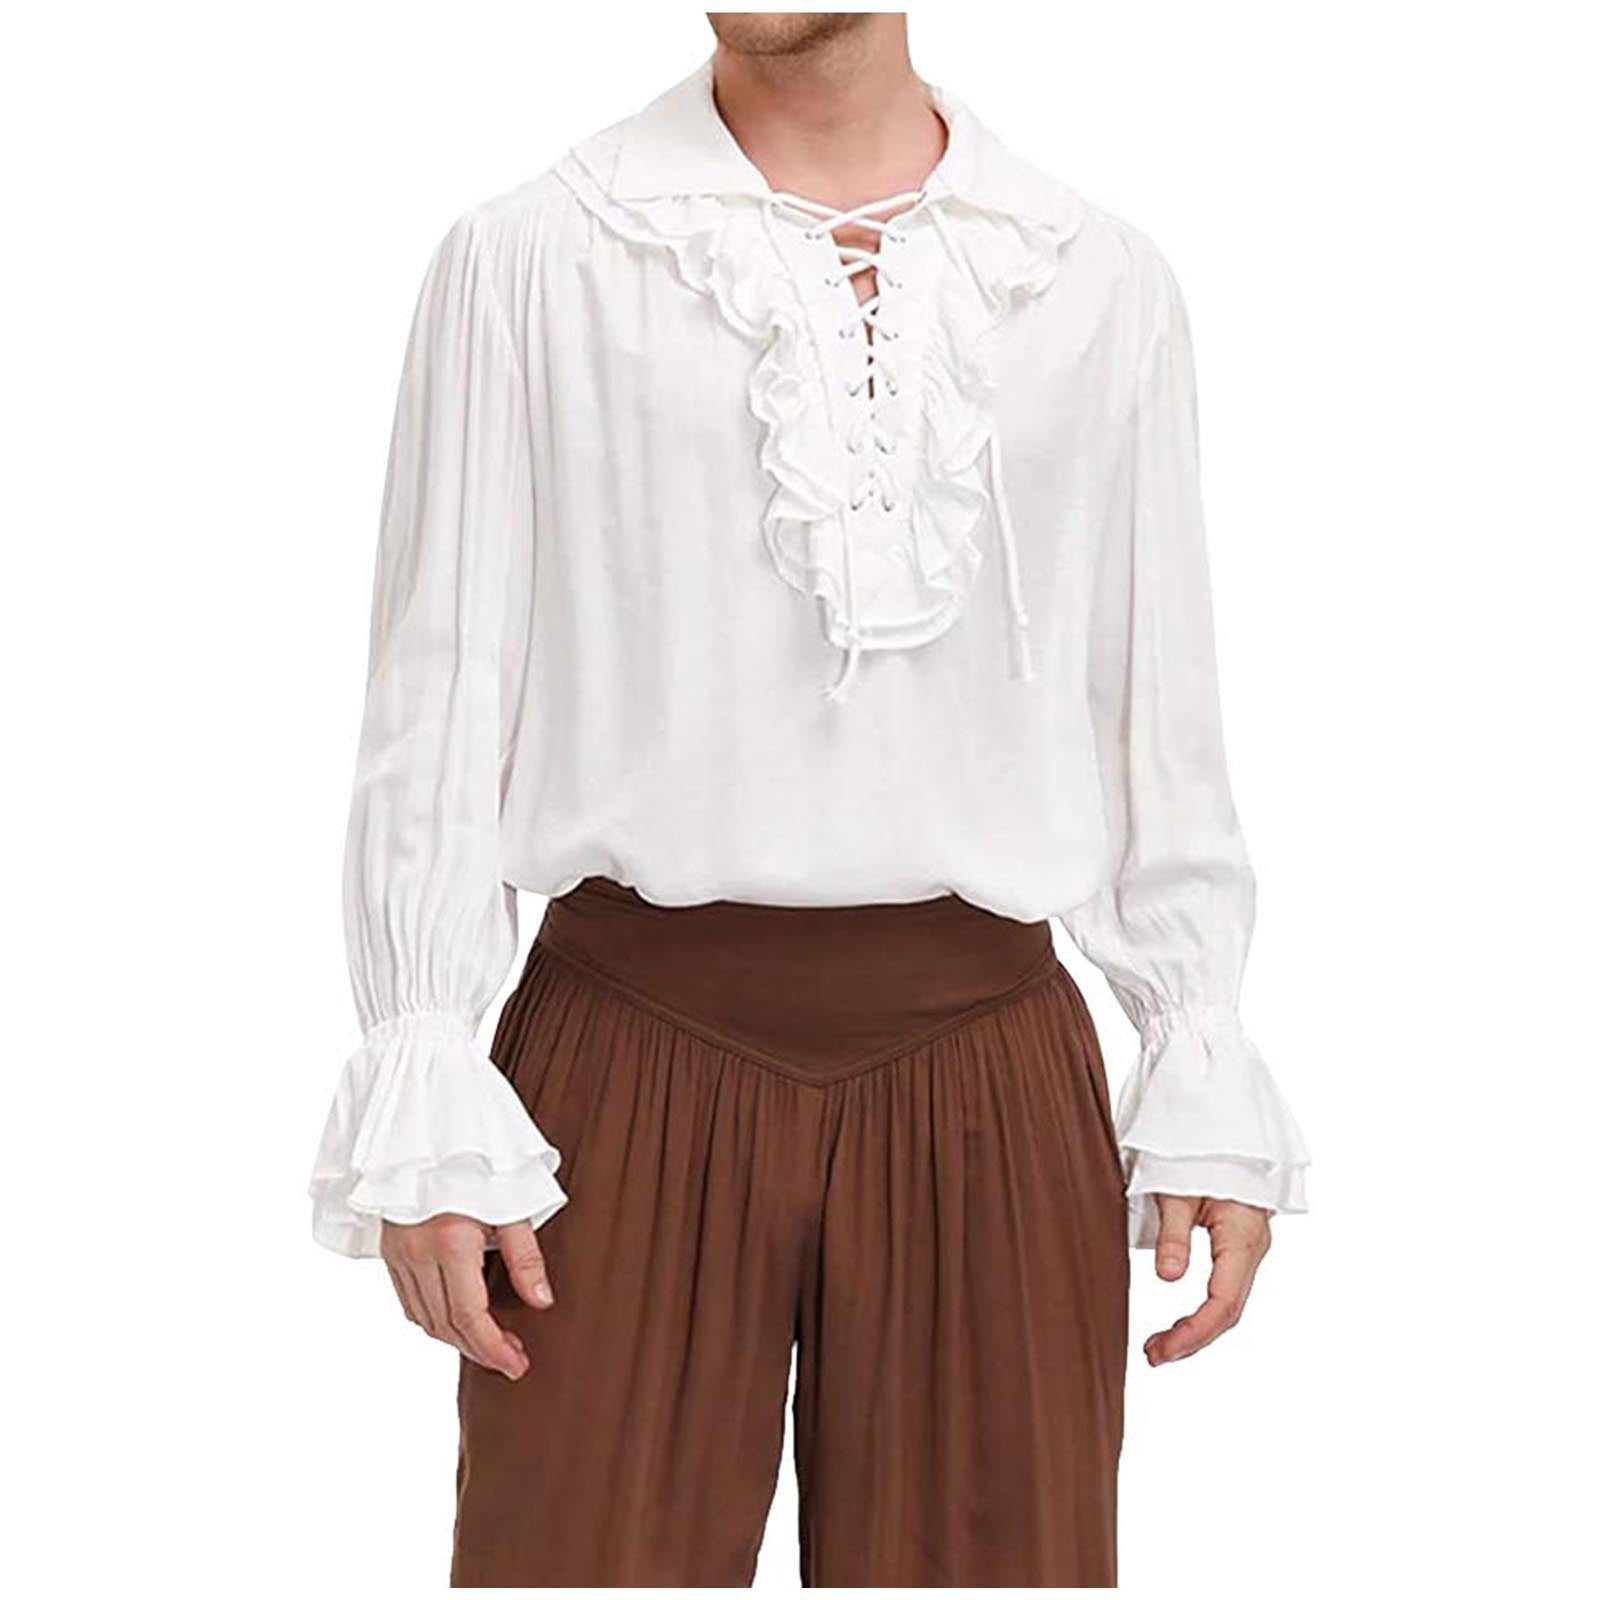 Mens Lace Up Ruffled Pirate Shirts Long Sleeve Victorian Steampunk  Renaissance Costume Medieval Gothic Cosplay Tops 